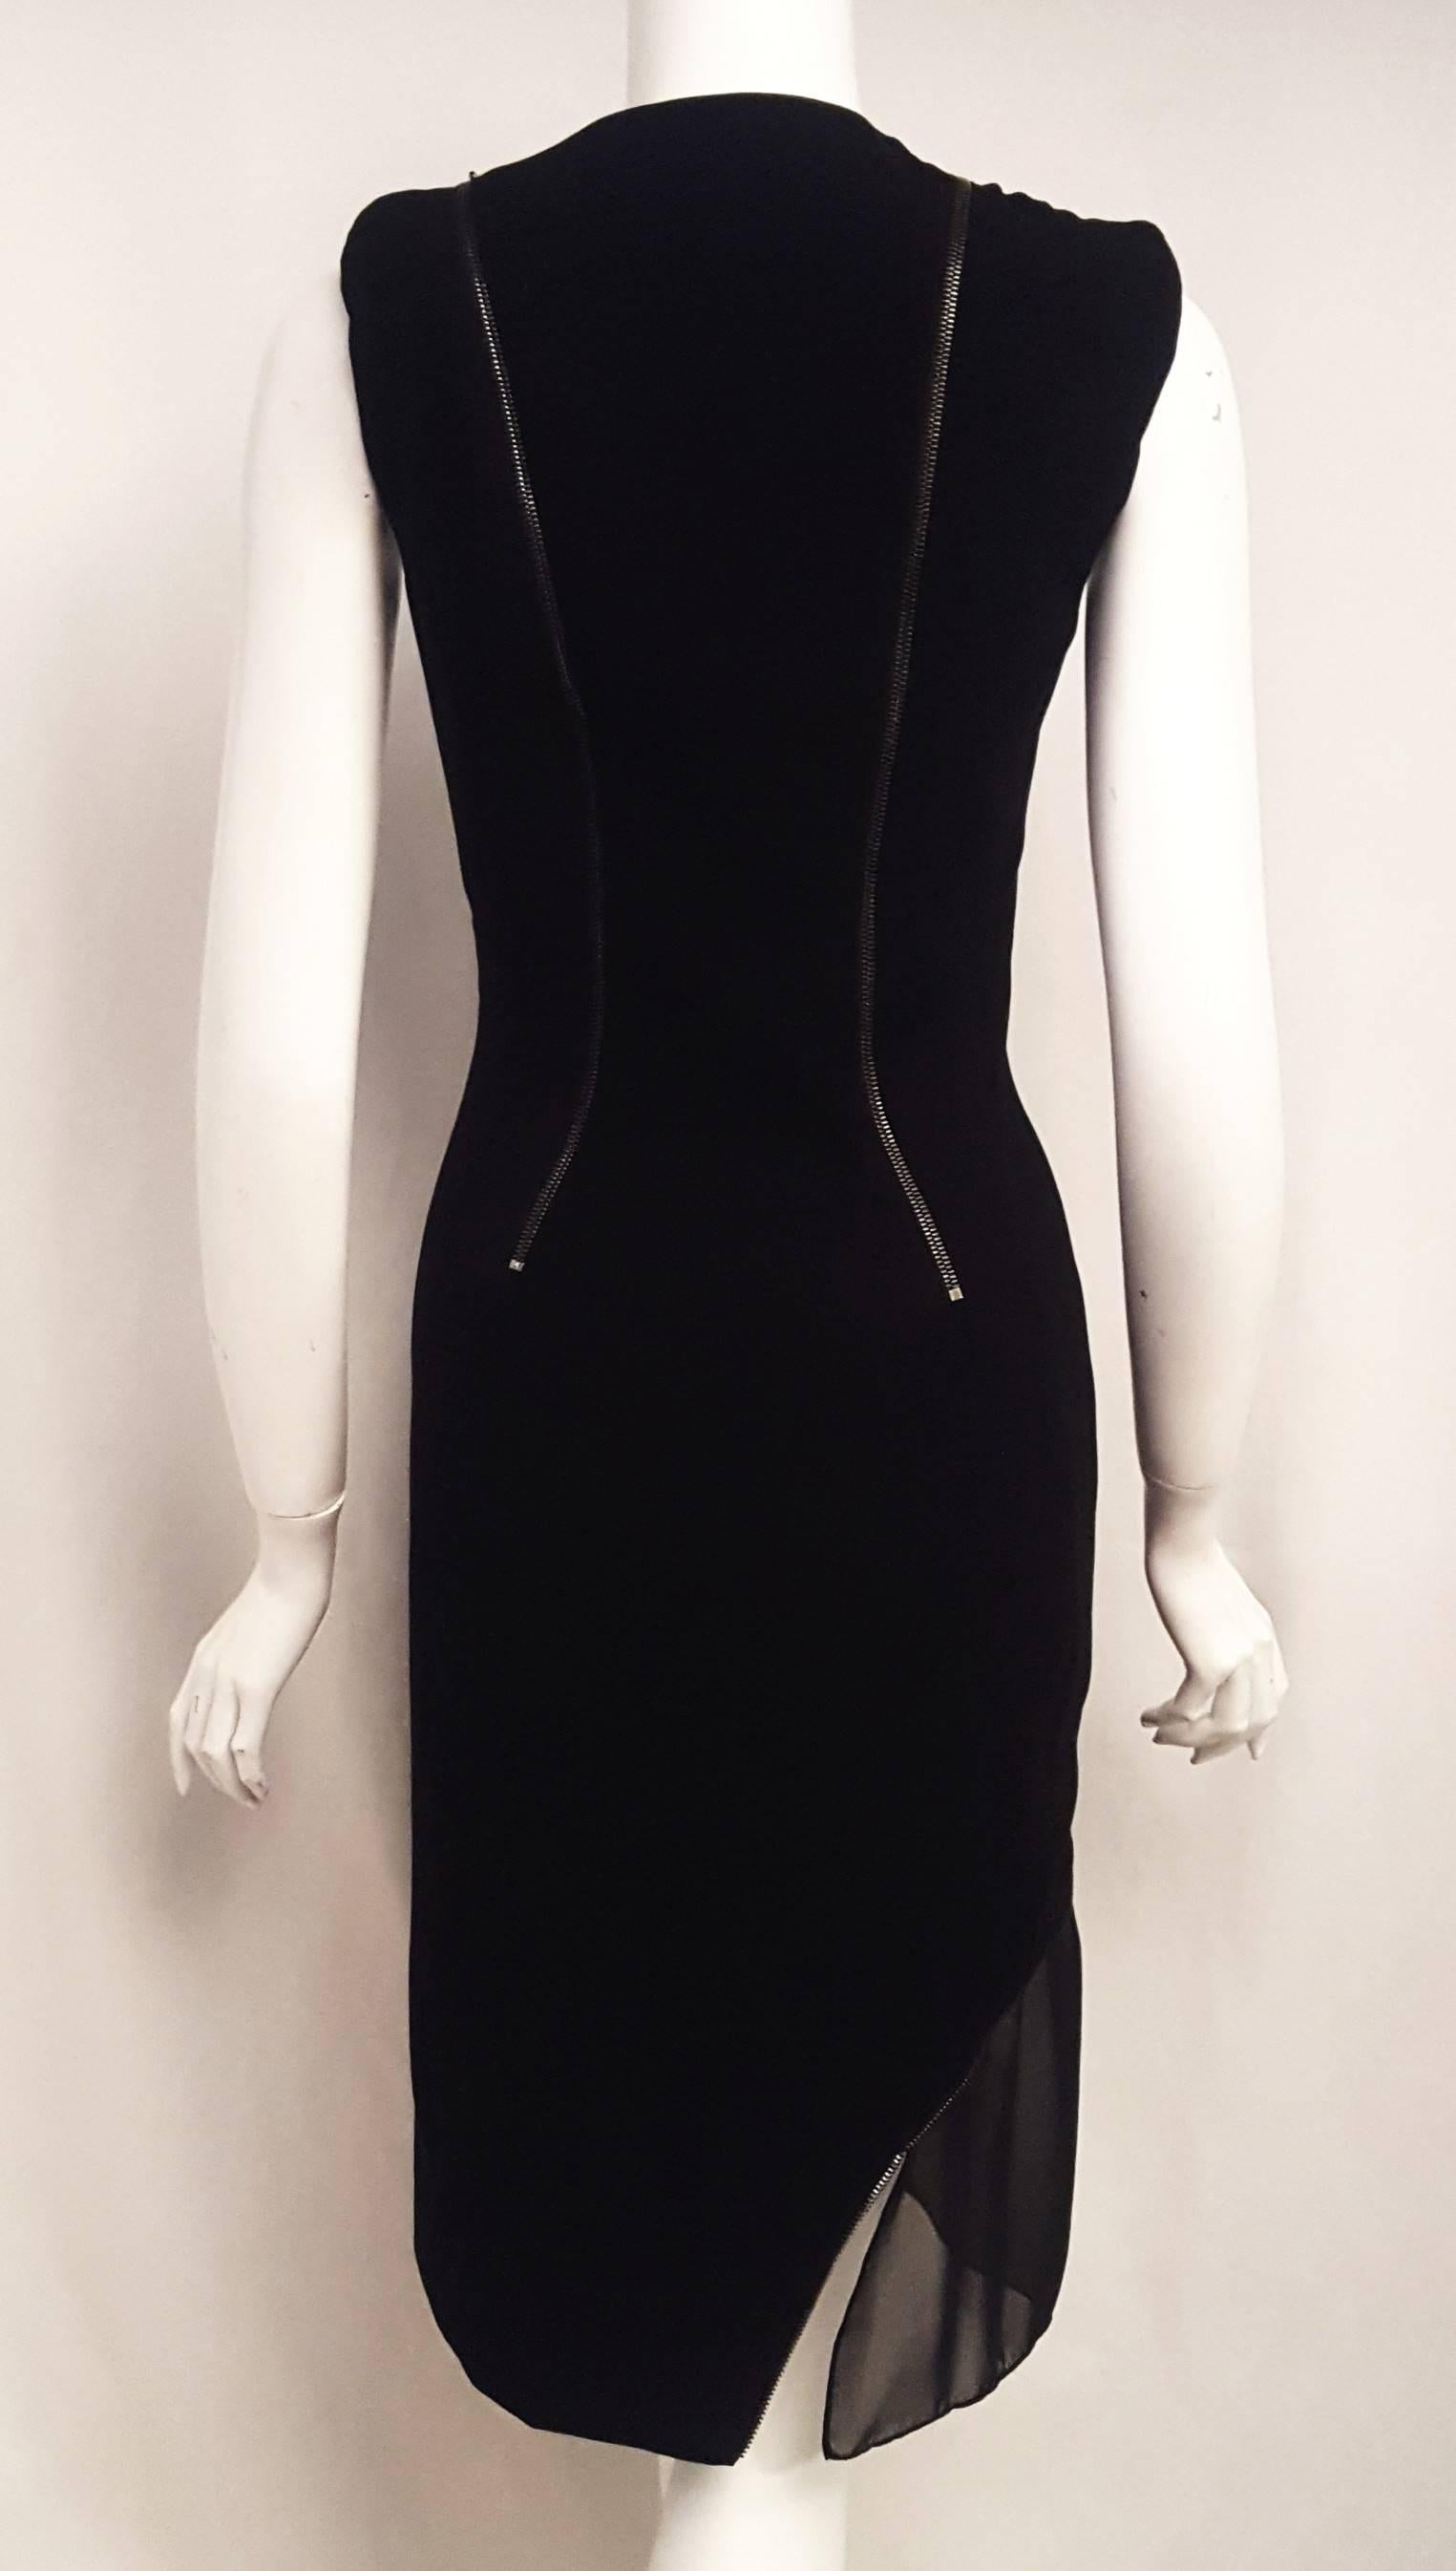 black dress with zippers